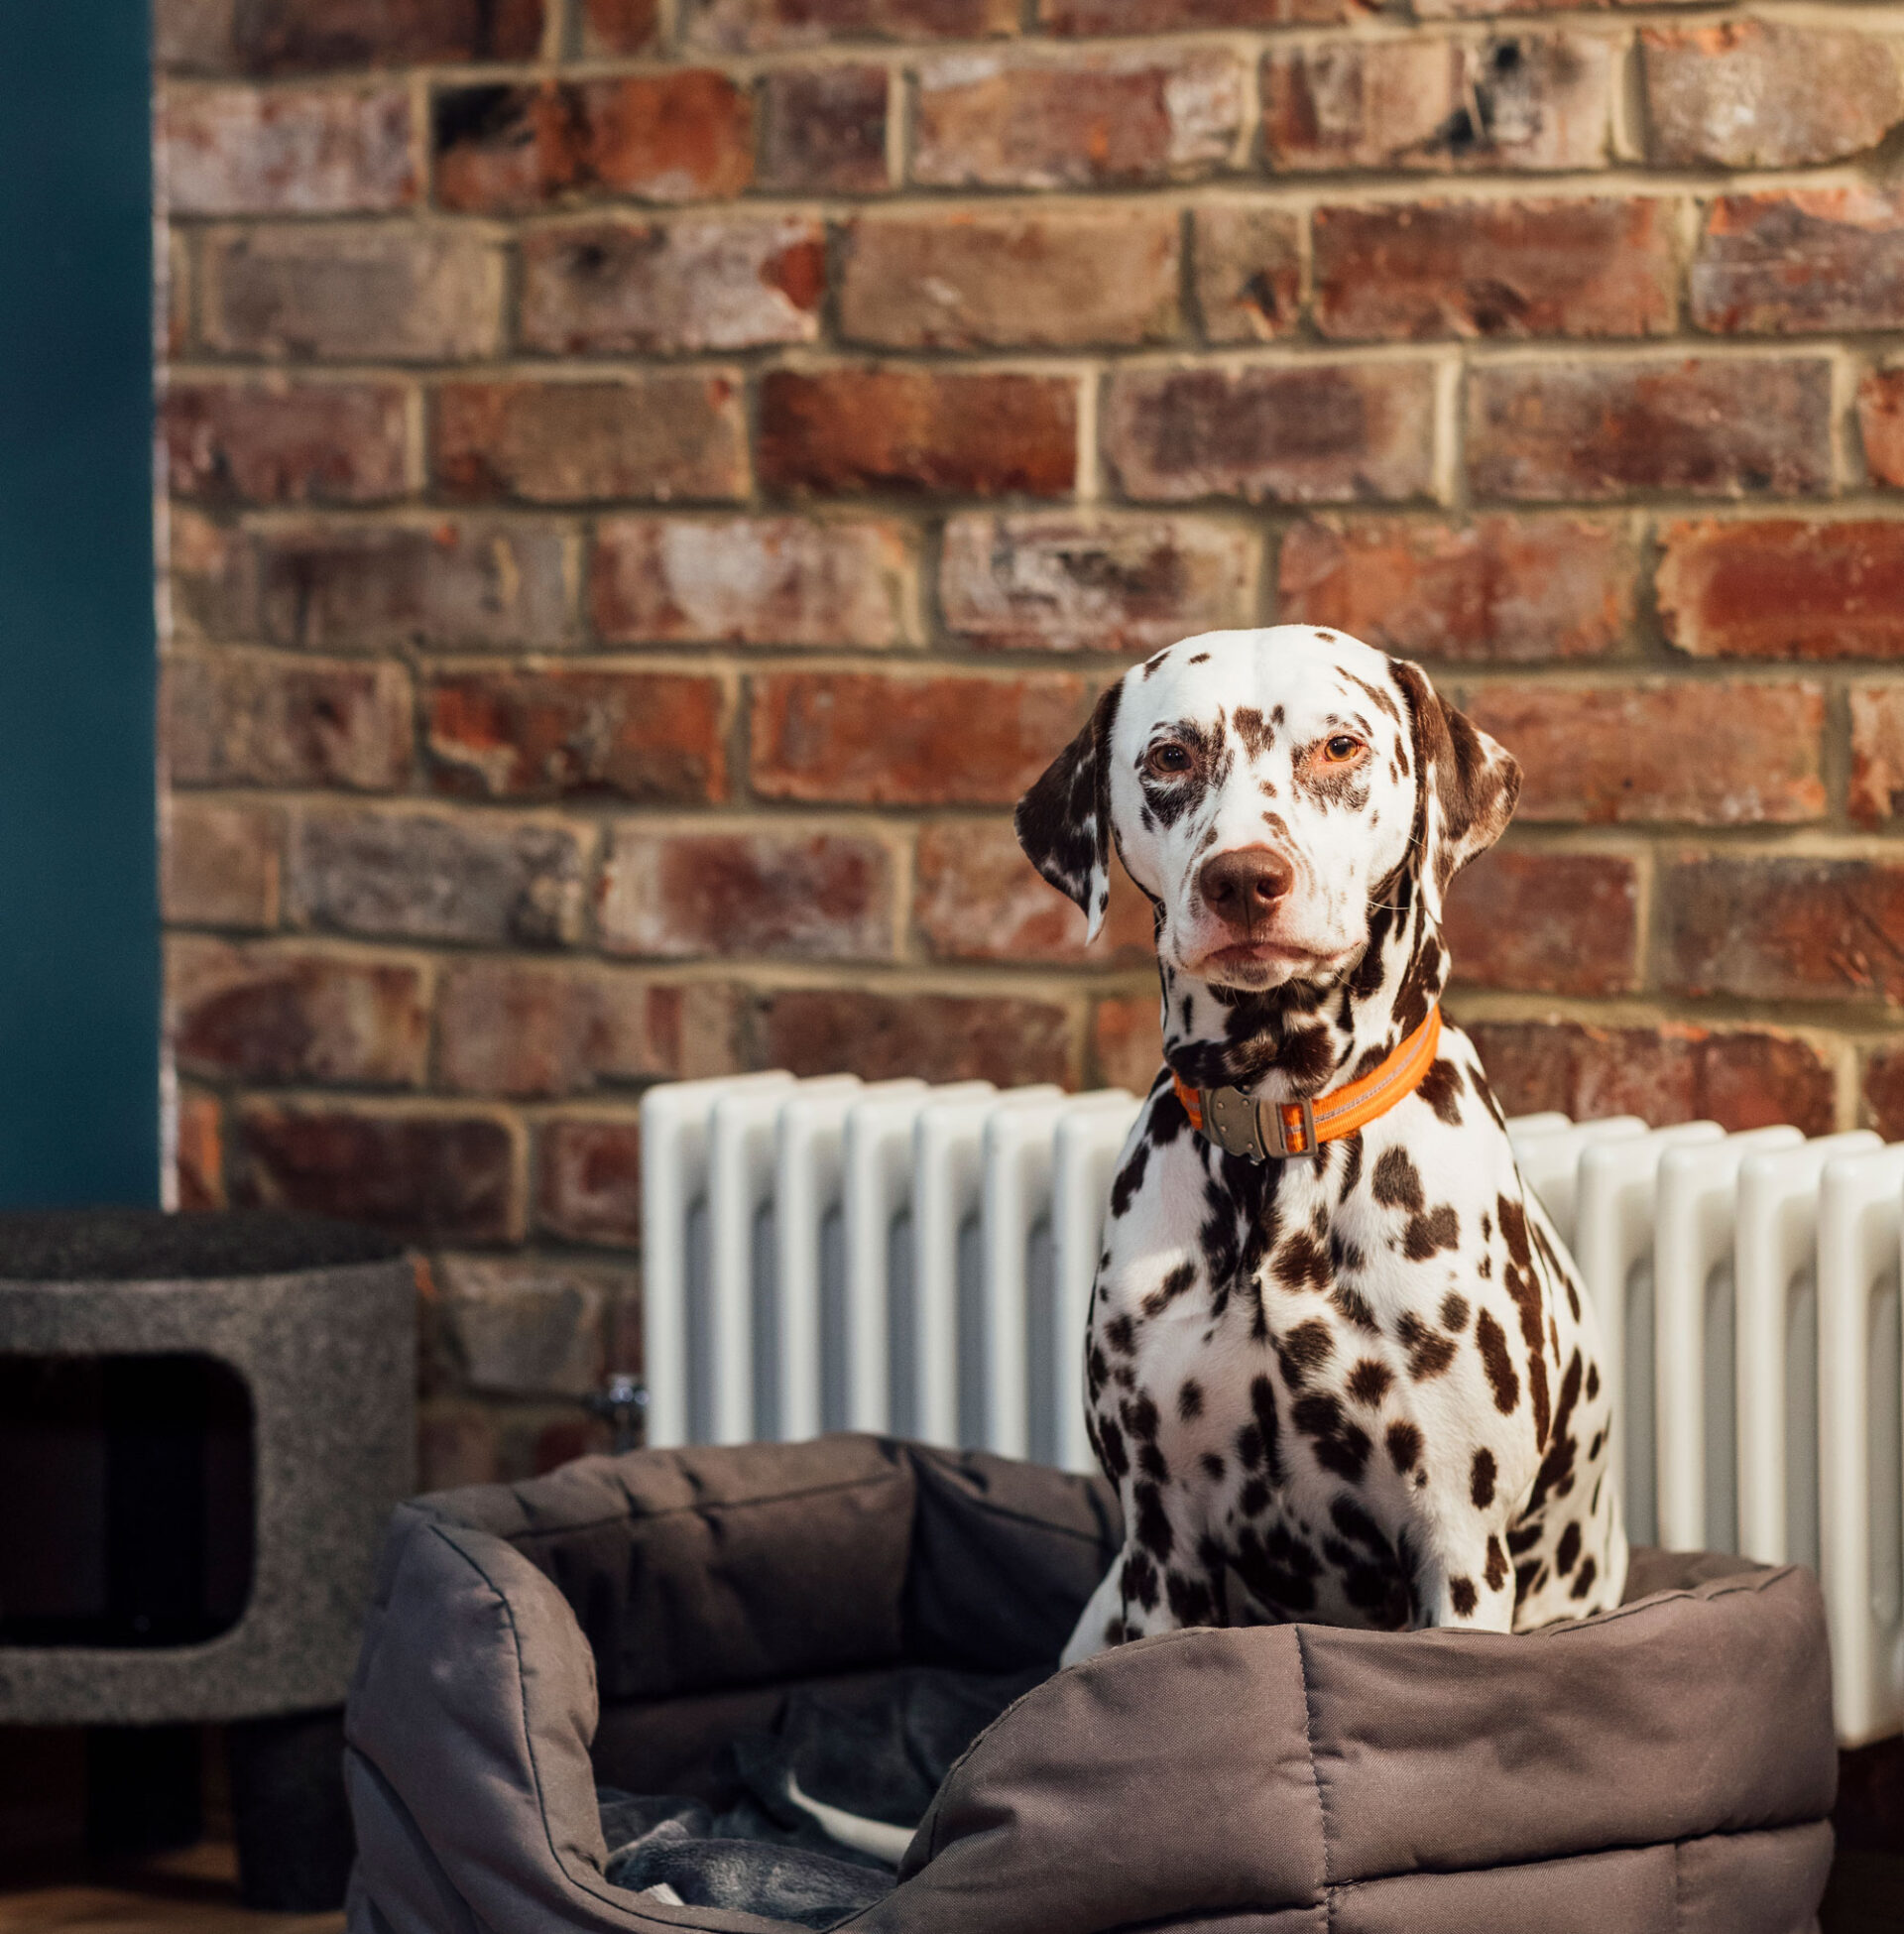 A dalmation sitting in its dog bed by a radiator